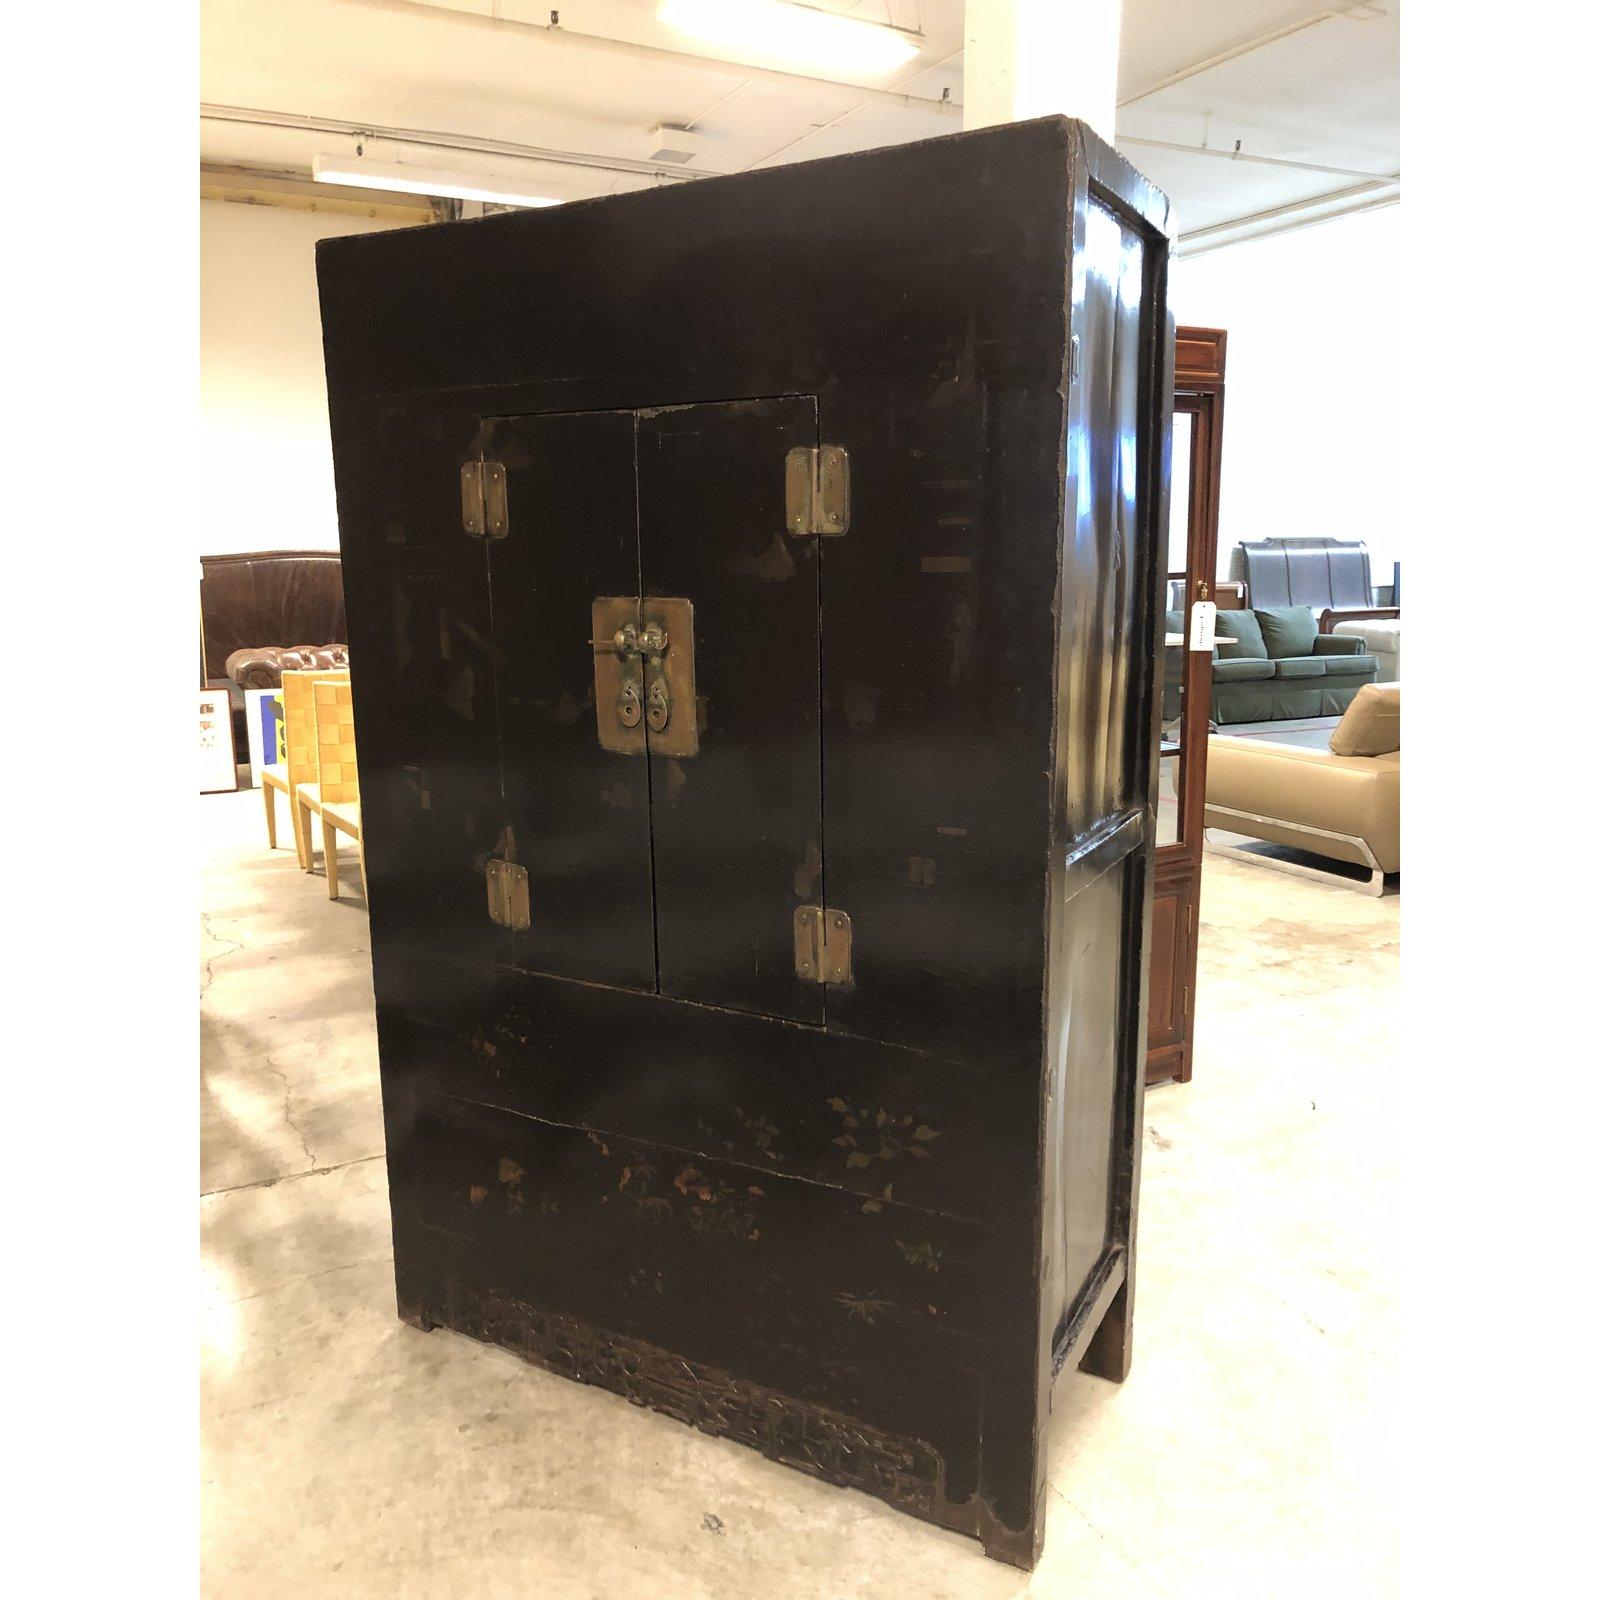 A stunning antique Chinese wedding cabinet from Gumps of San Francisco. Known for its unique Asian Collection, Gumps was a resource for the collector. This large black lacquer cabinet is fitted with traditional brass hardware and has painted and